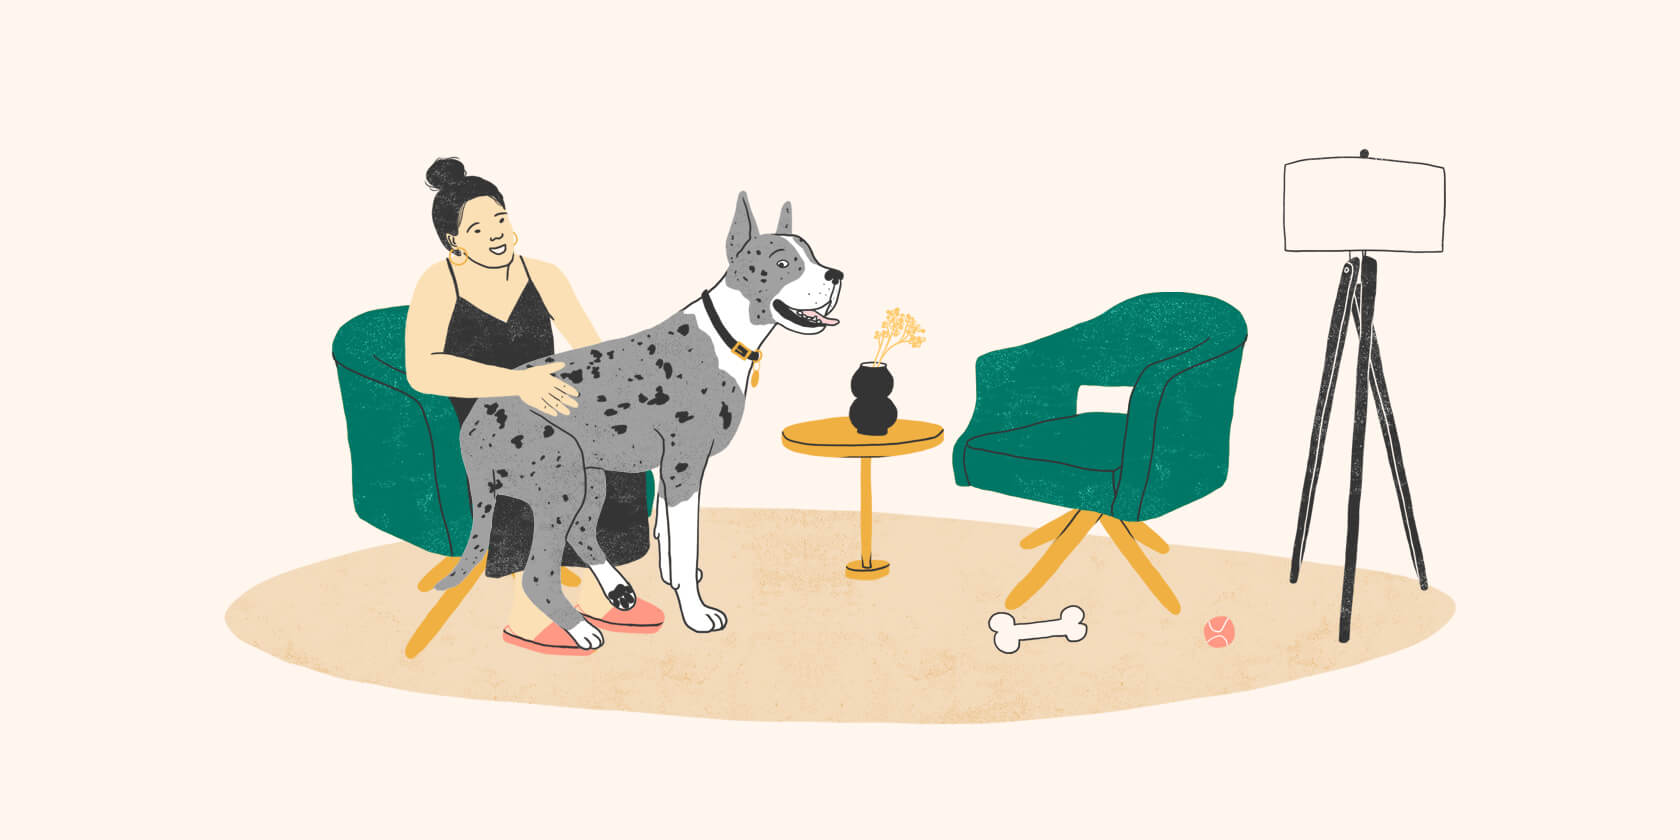 Illustration of a large dog sitting on its owner's lap.